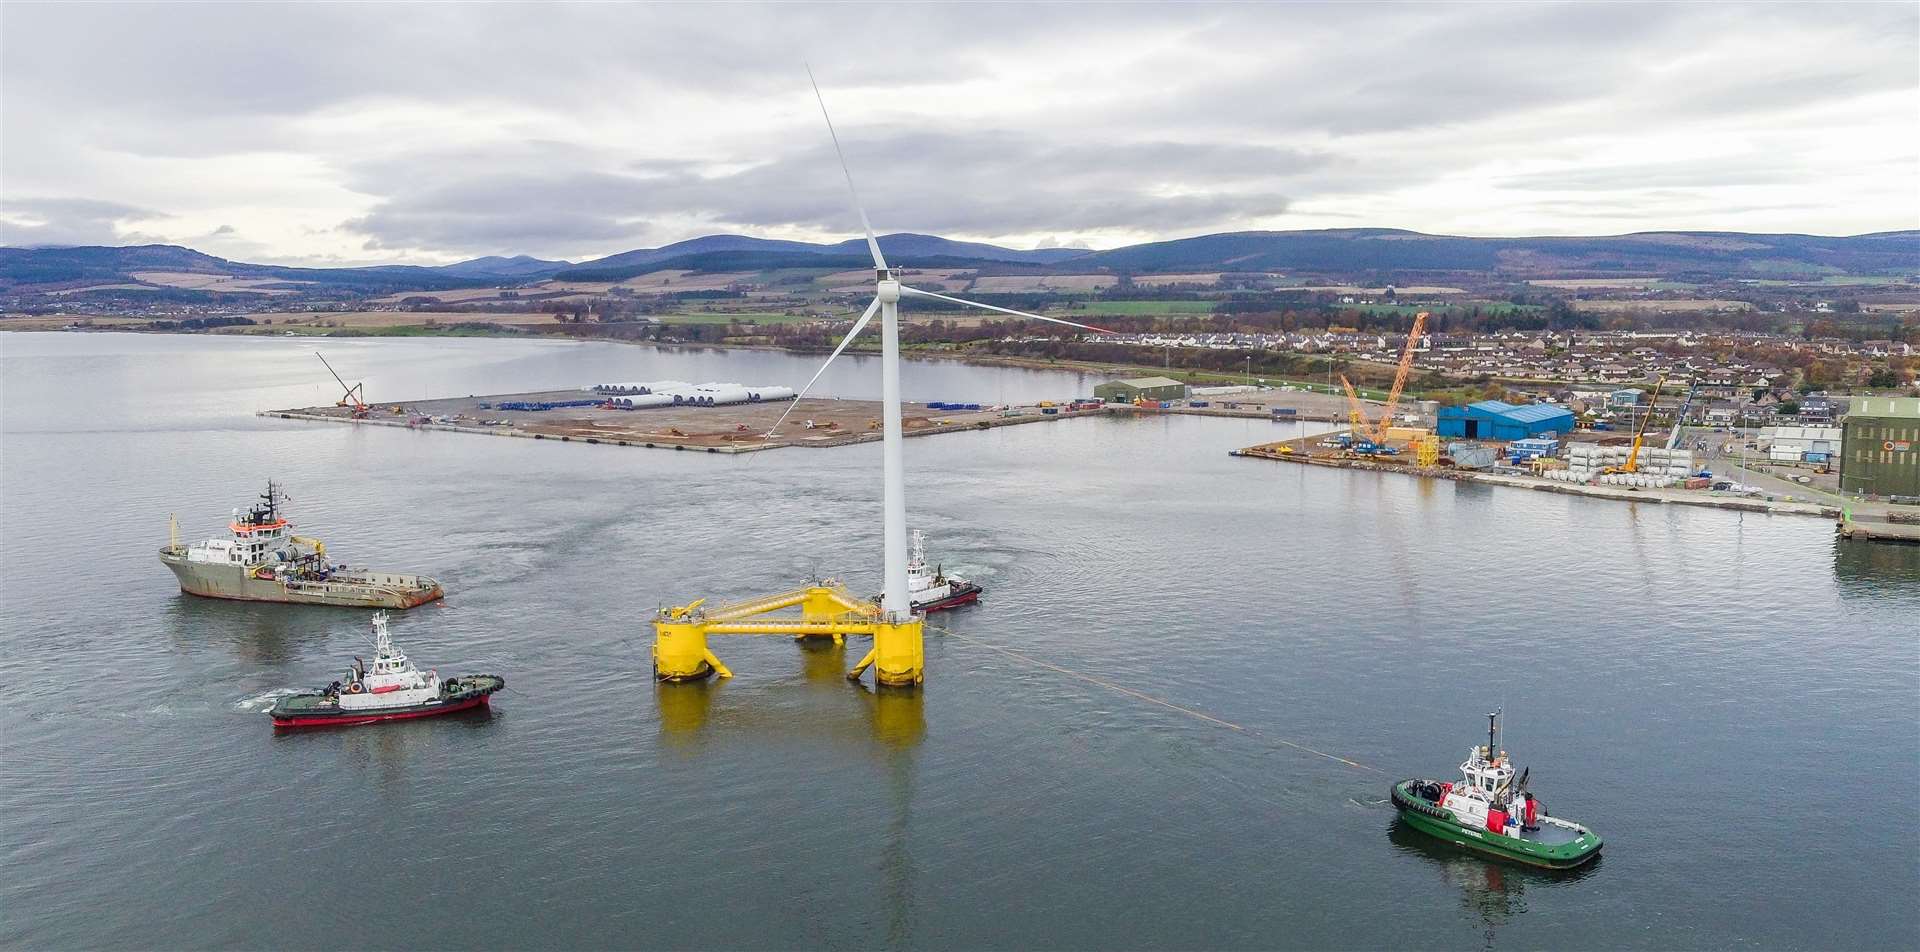 The Cromarty Firth is already ' is uniquely positioned at the heart of a host of multi-billion pound renewable projects', according to PoCF chief executive Bob Buskie. Image by: Malcolm McCurrach | © Malcolm McCurrach 2020